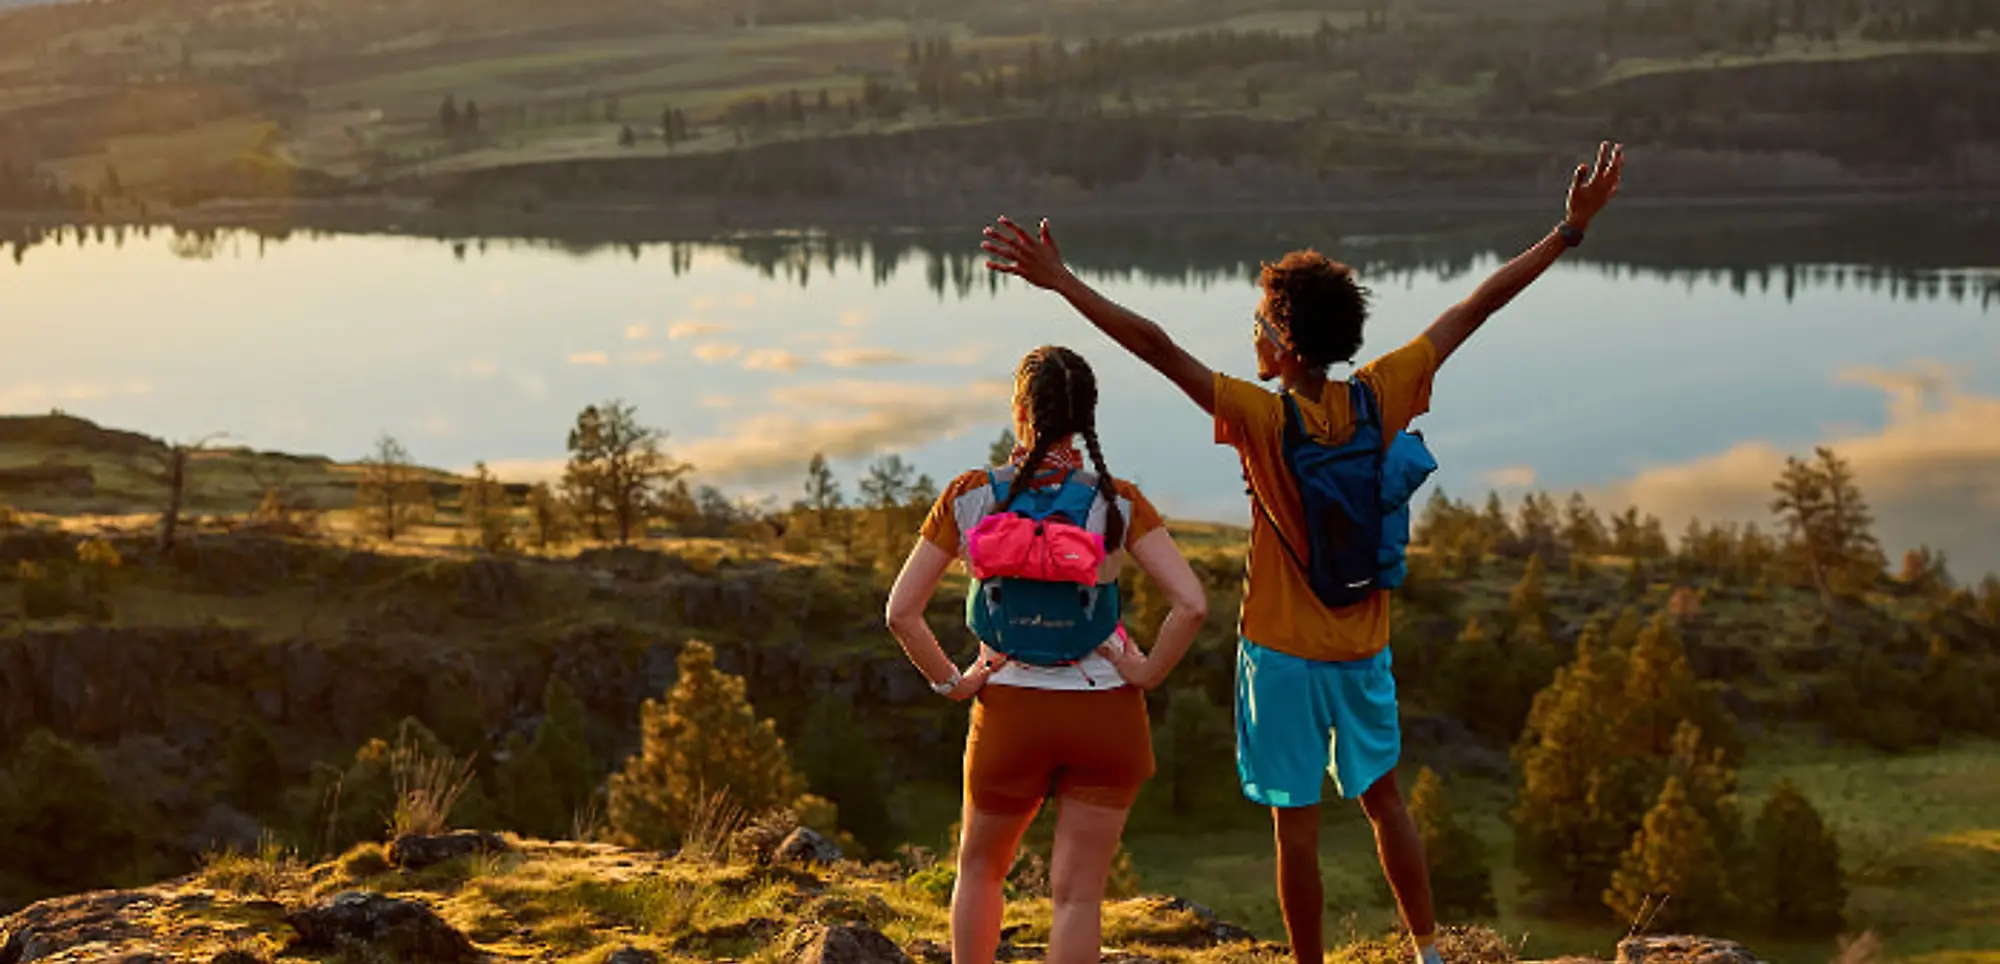 Trail Running Is on the Rise. Should Retailers Invest in the Shoes?